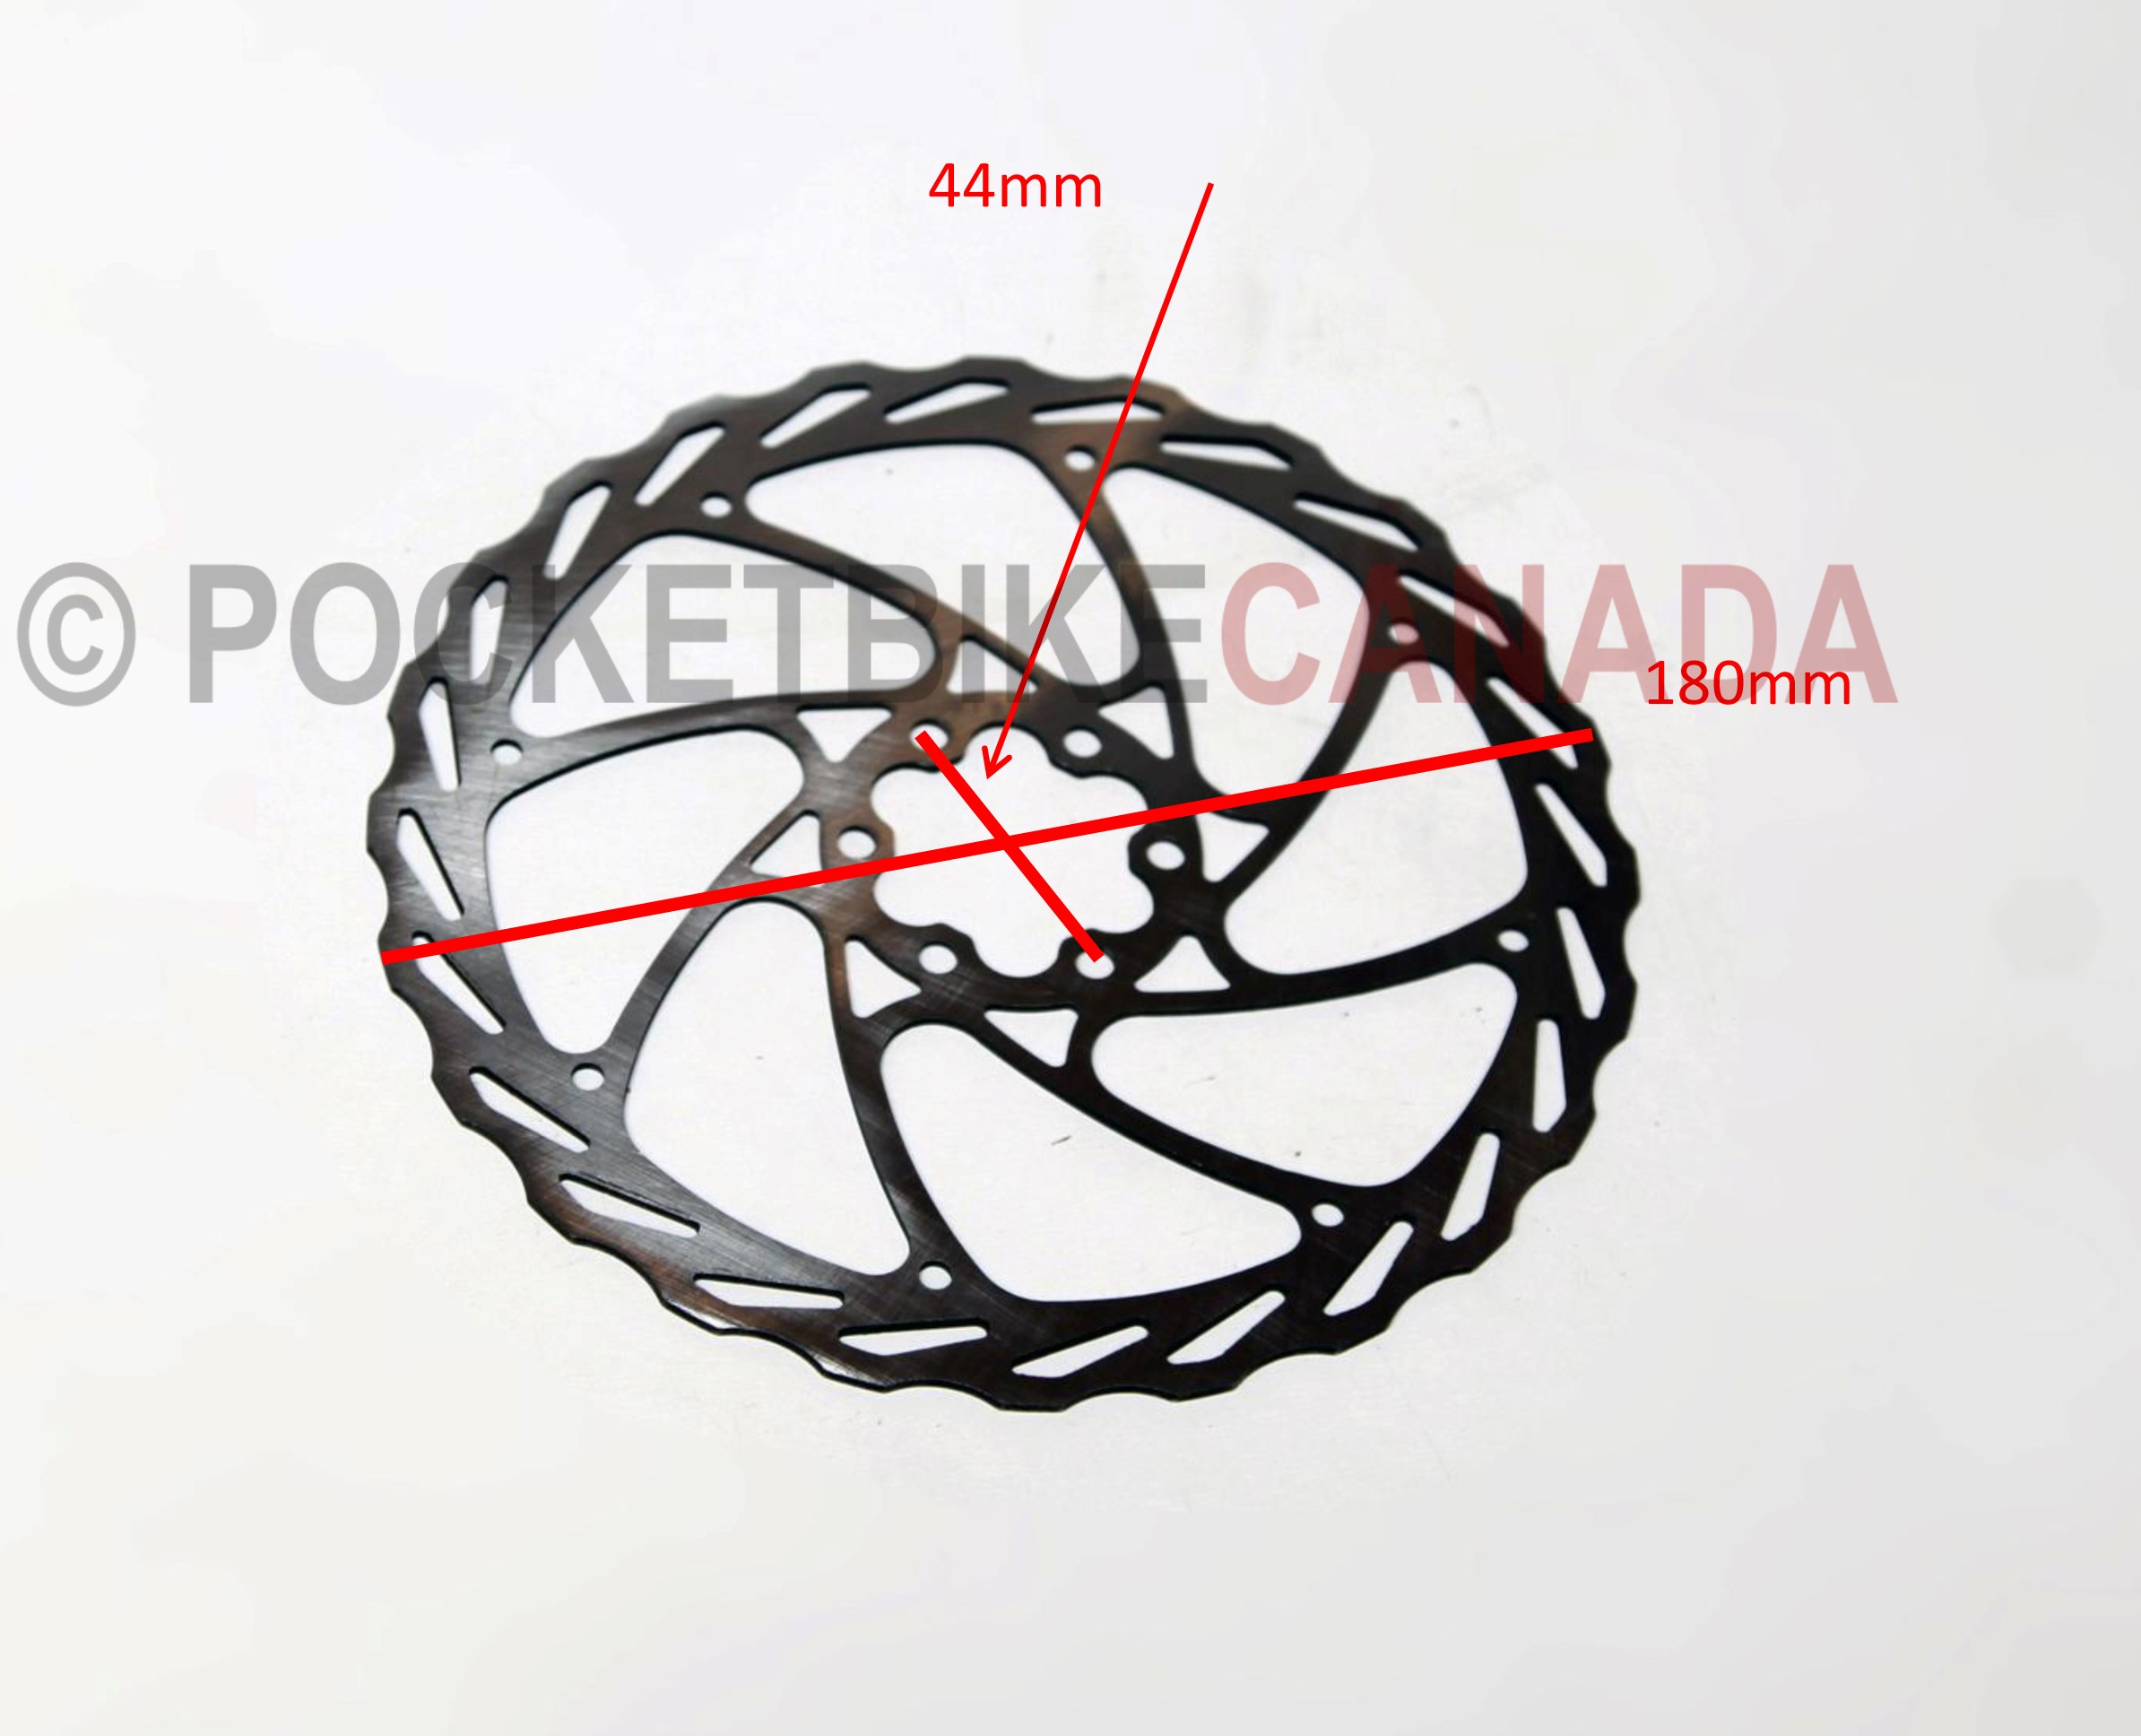 FatBike Slotted Disc Brake Rotor 180mm for Surface 604 Fat Bike - S6040011